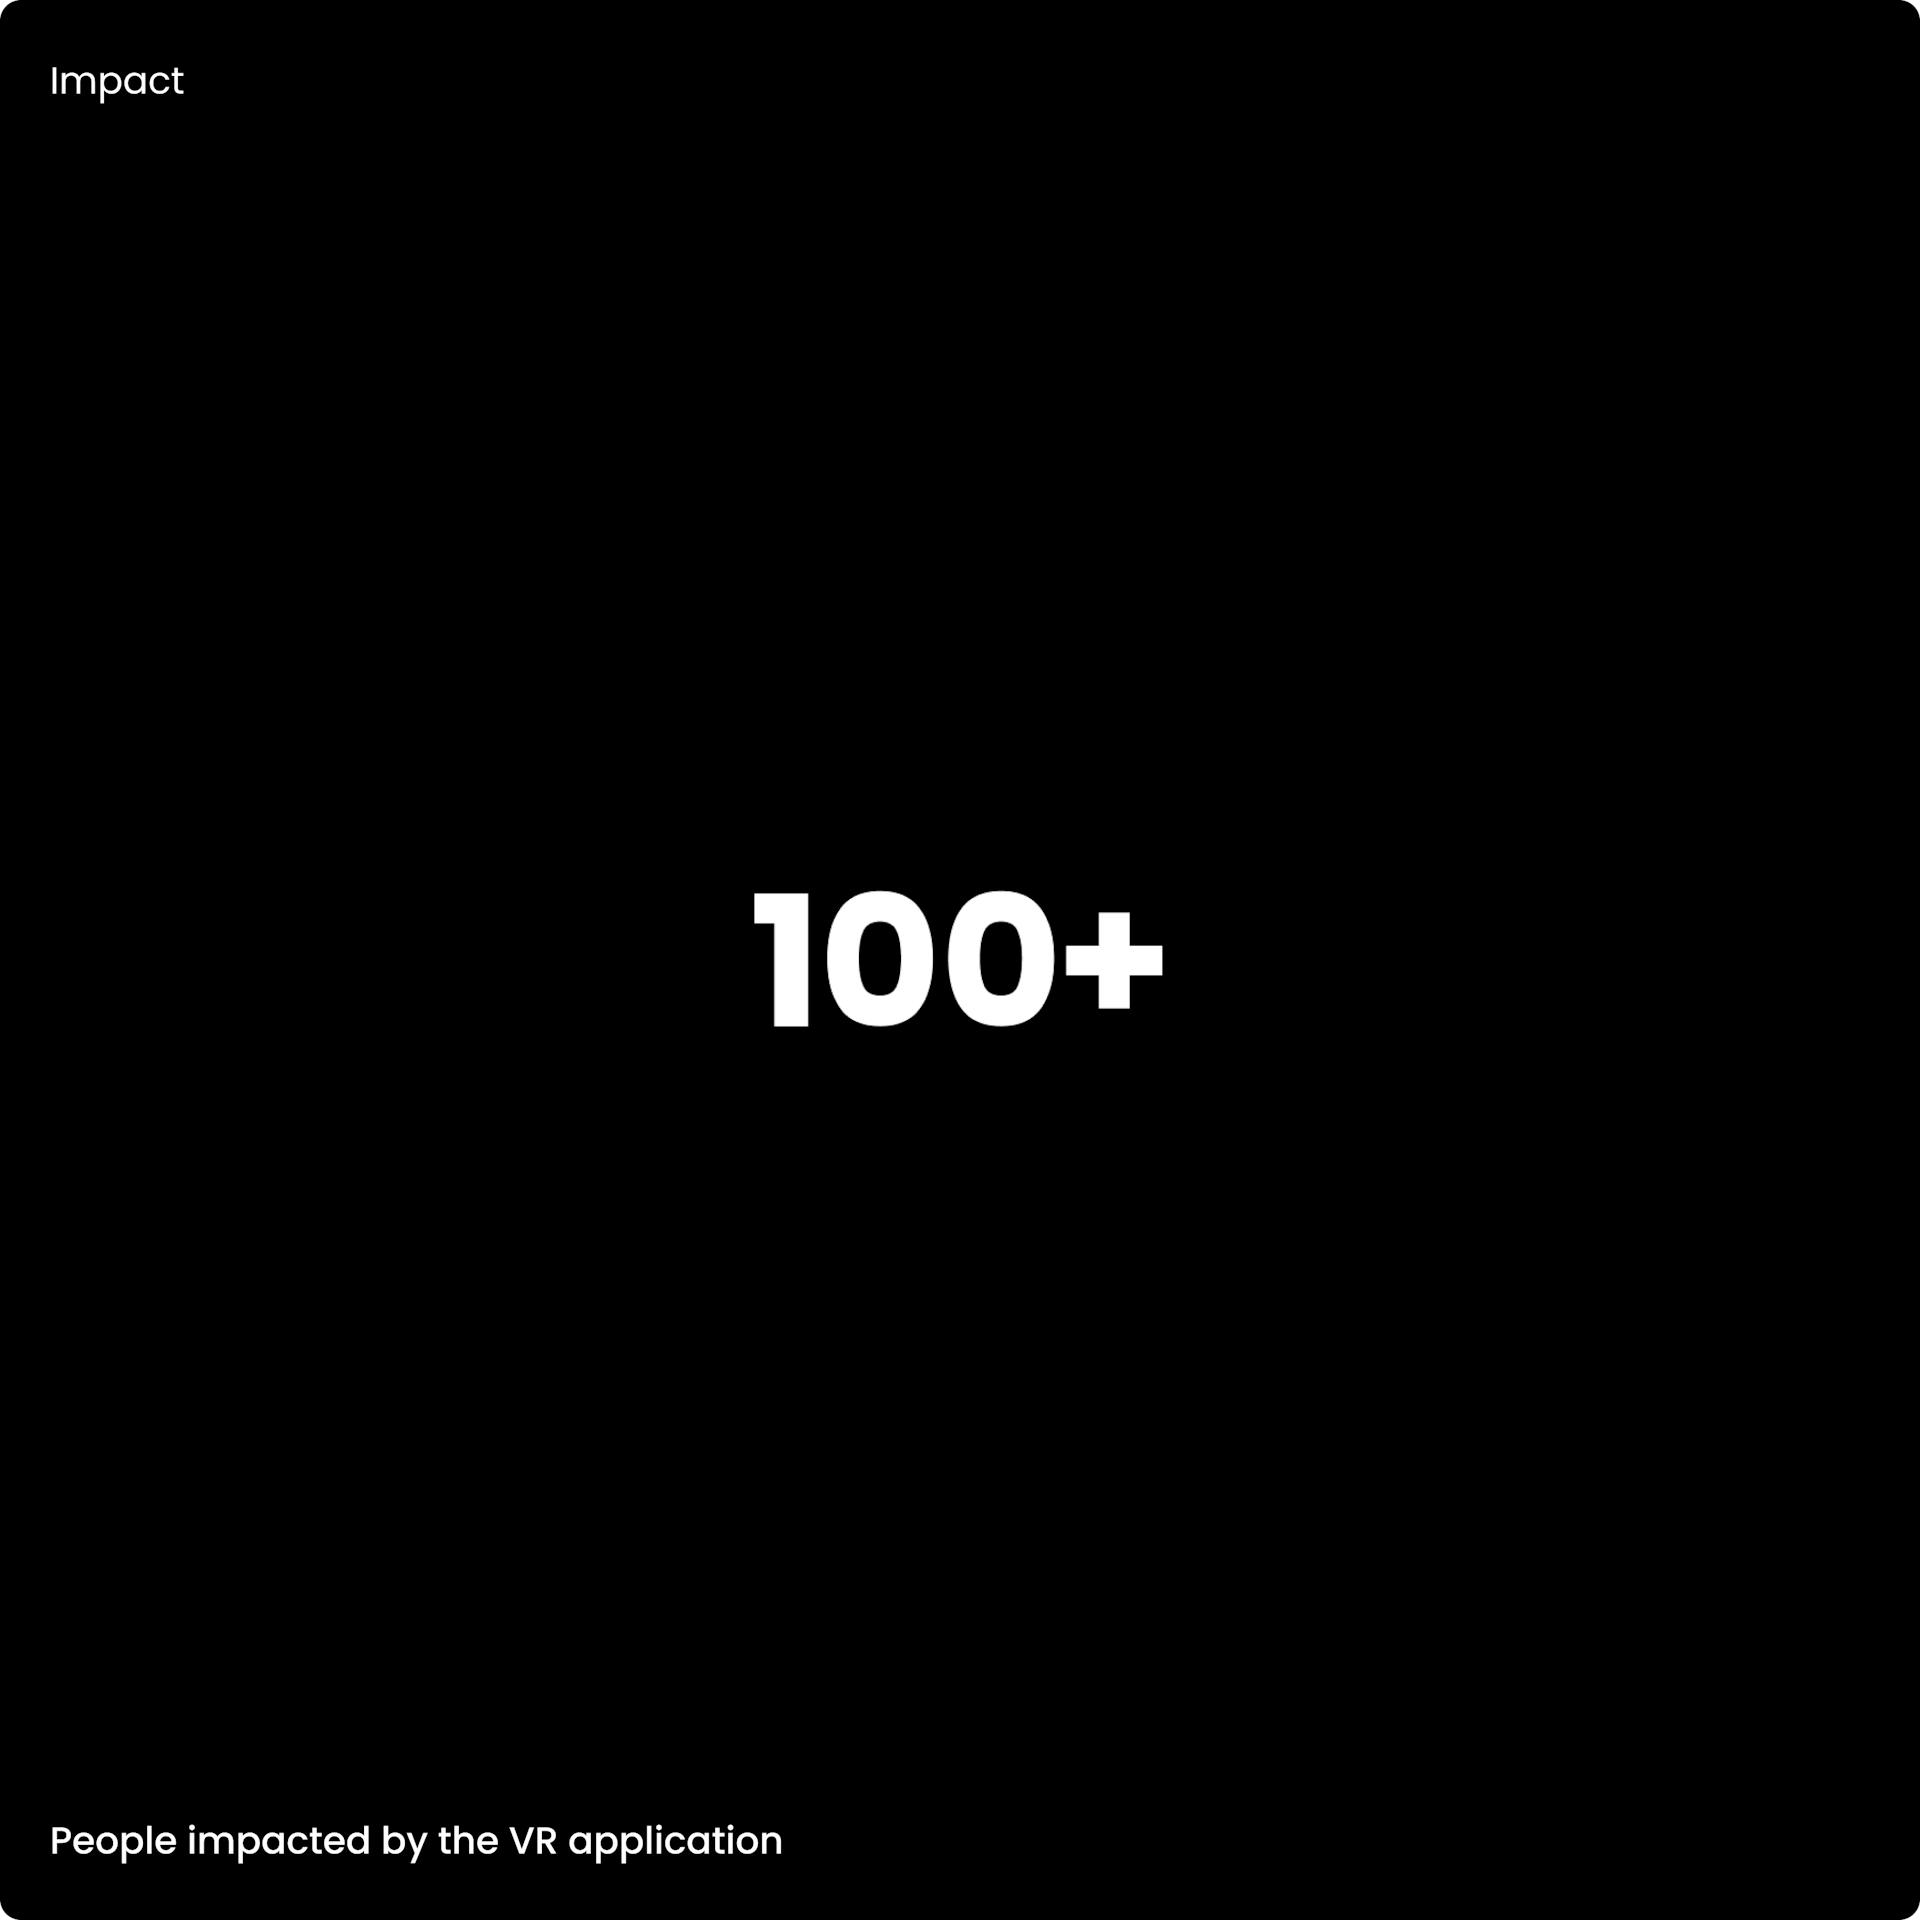 A black tile with "100+" written in white and the footnote "People impacted by the VR application"